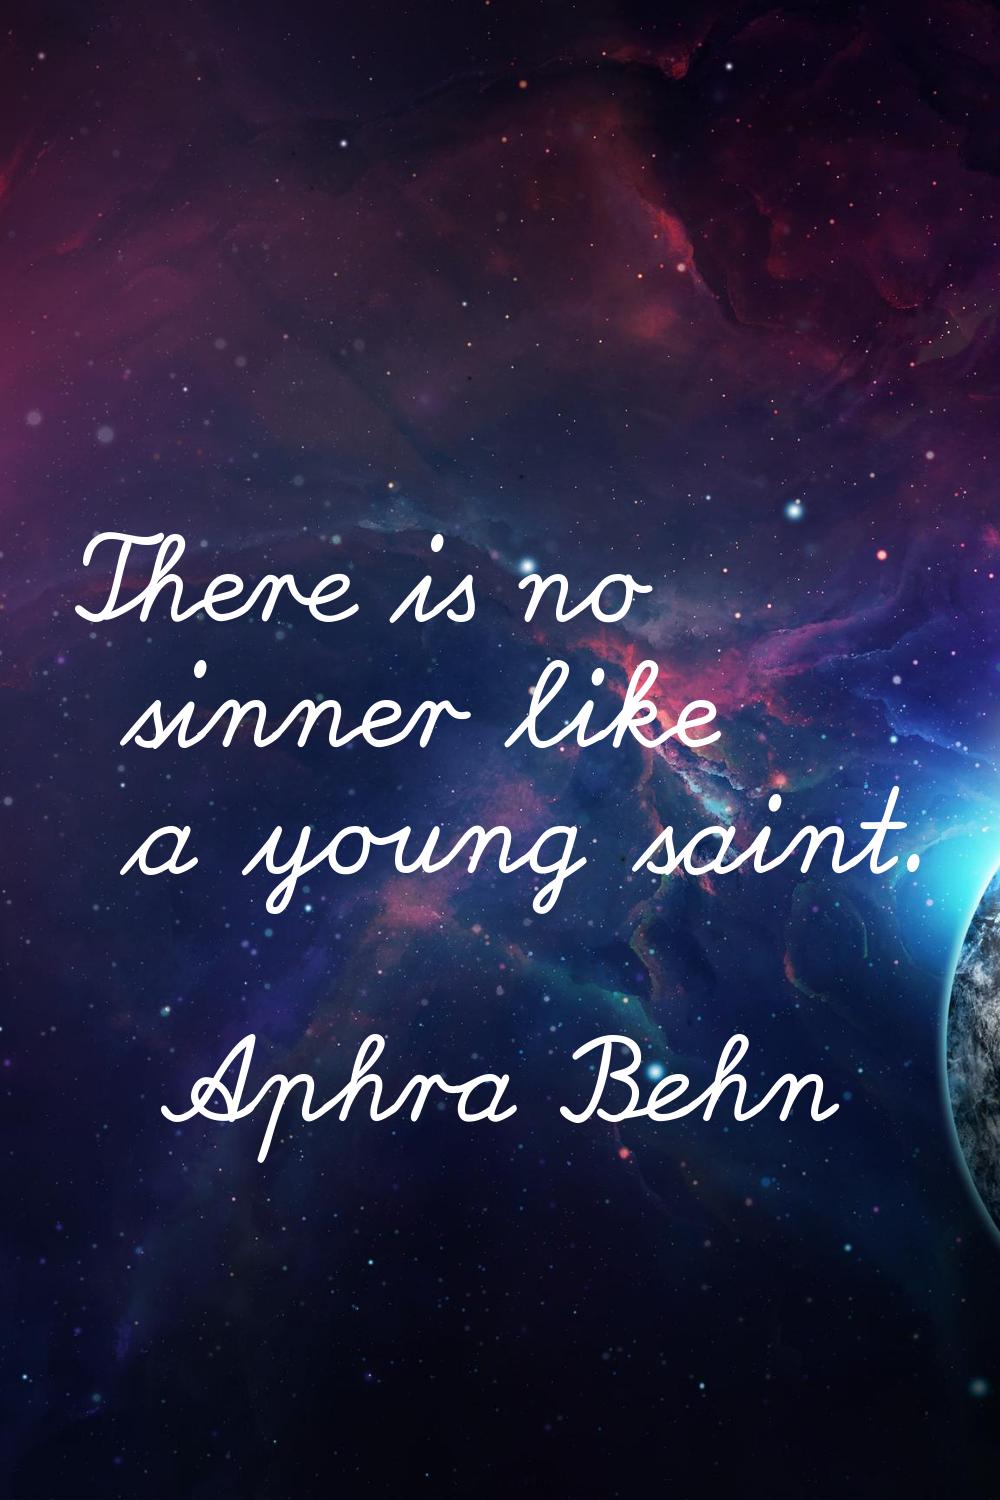 There is no sinner like a young saint.